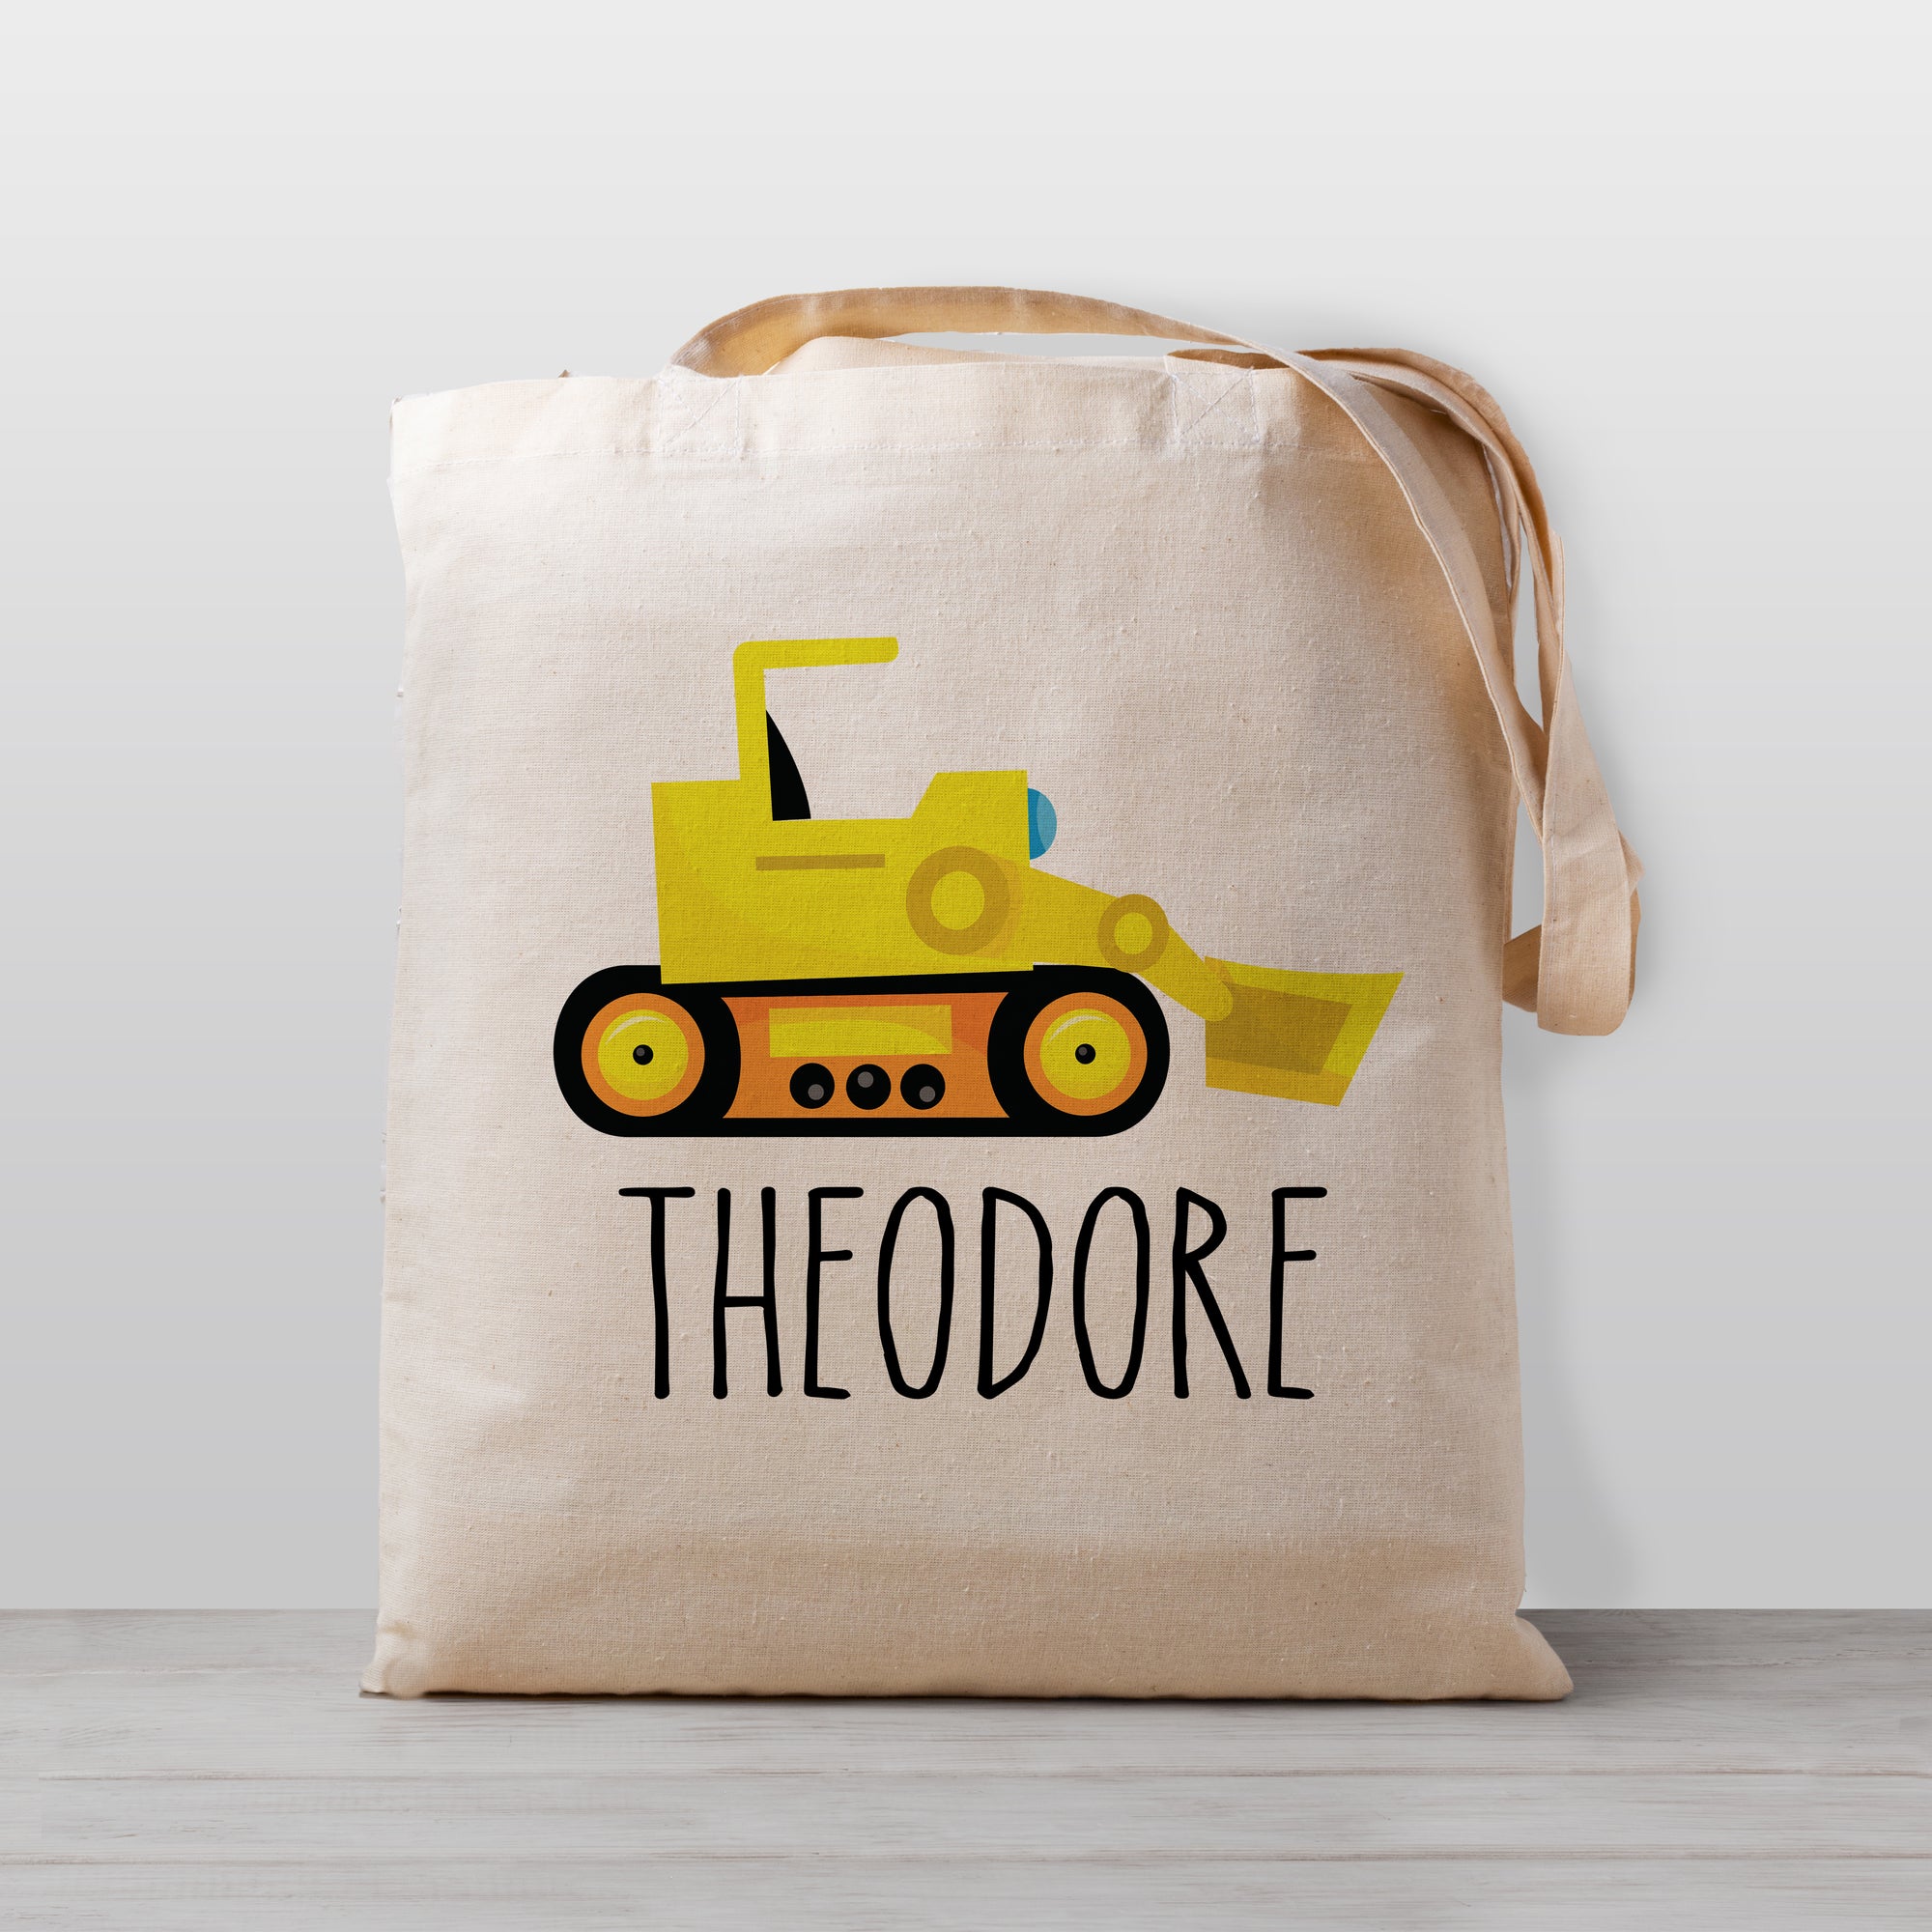 Bulldozer kids personalized tote bag, excavator for construction, 100% natural cotton canvas